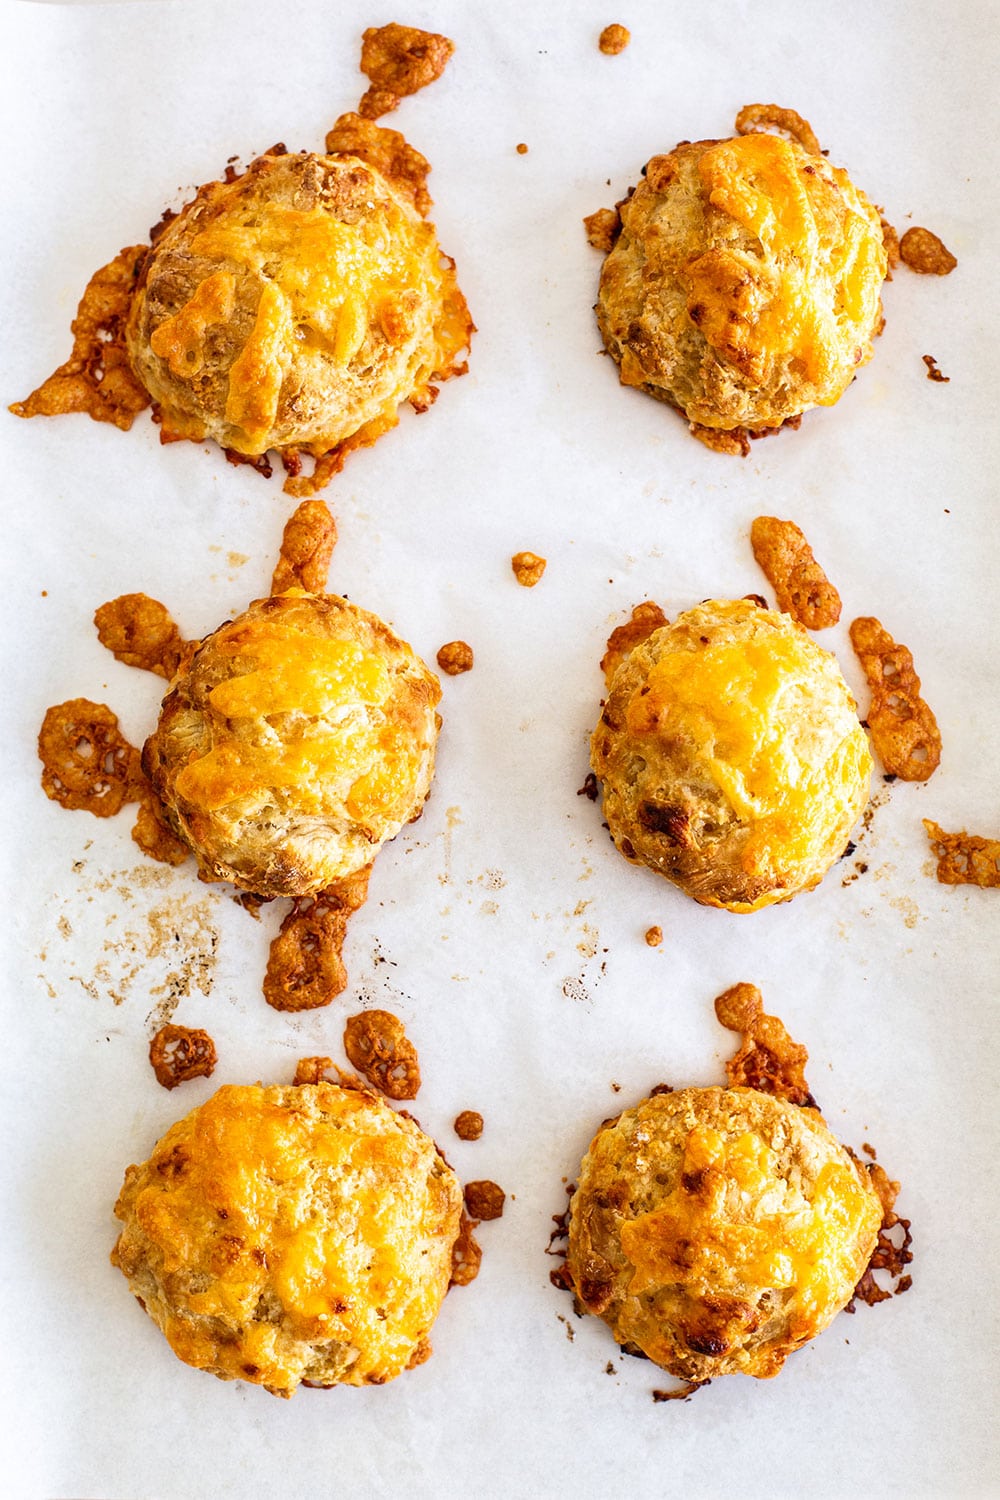 Crispy, flaky, fluffy golden cheddar biscuits on a baking sheet